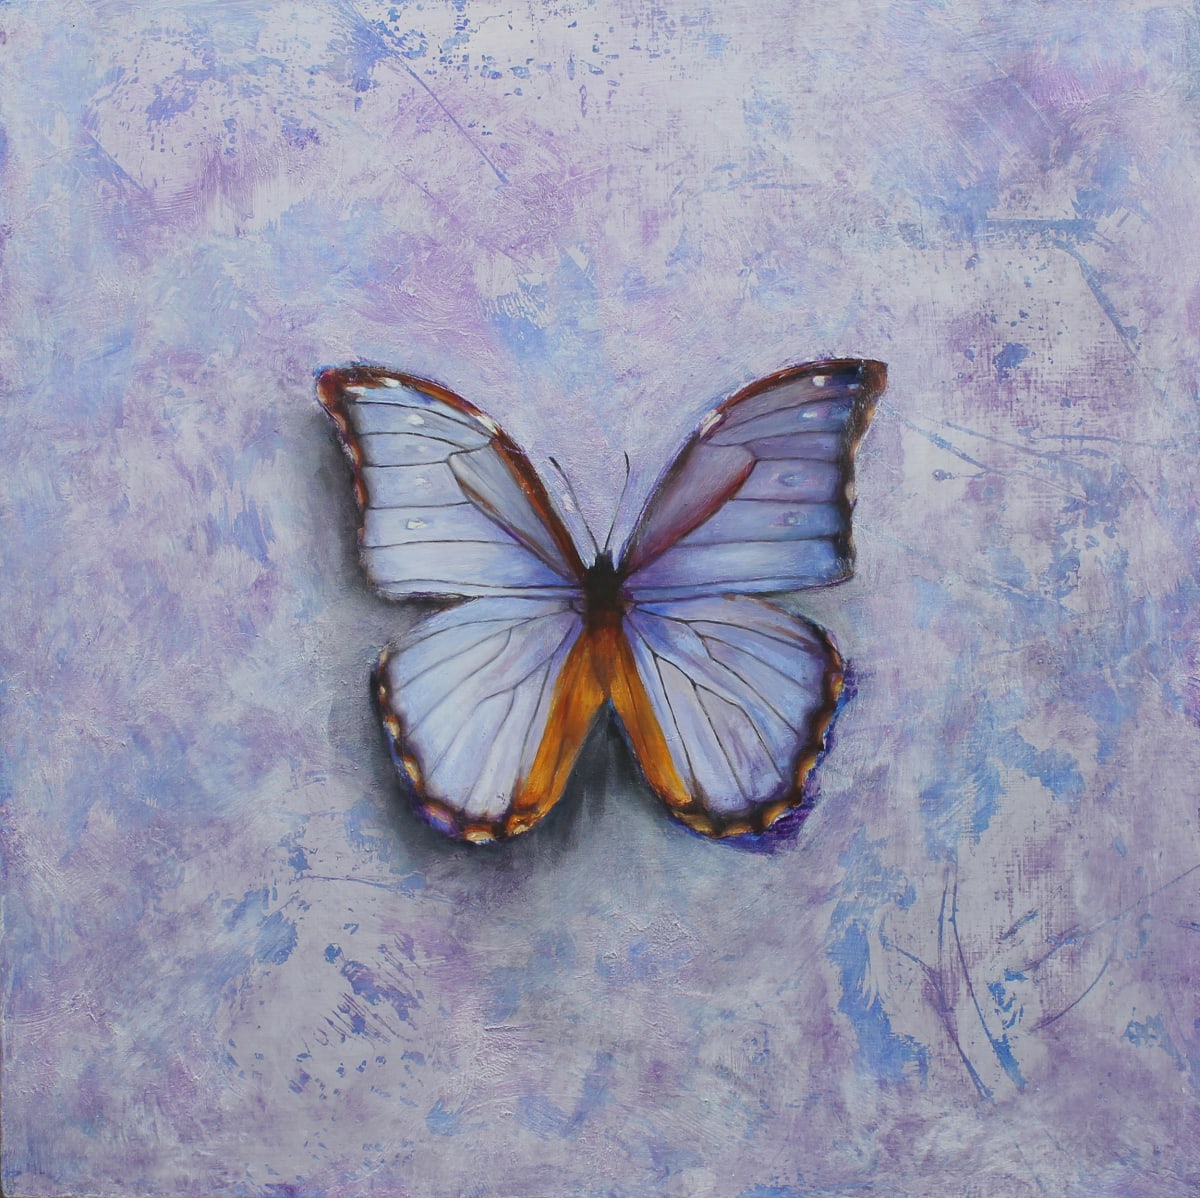 Purple Haze by Catherine Mills  Image: Original oil painting, oil and metal leaf on gallery wood panel, 16 x 16 inches